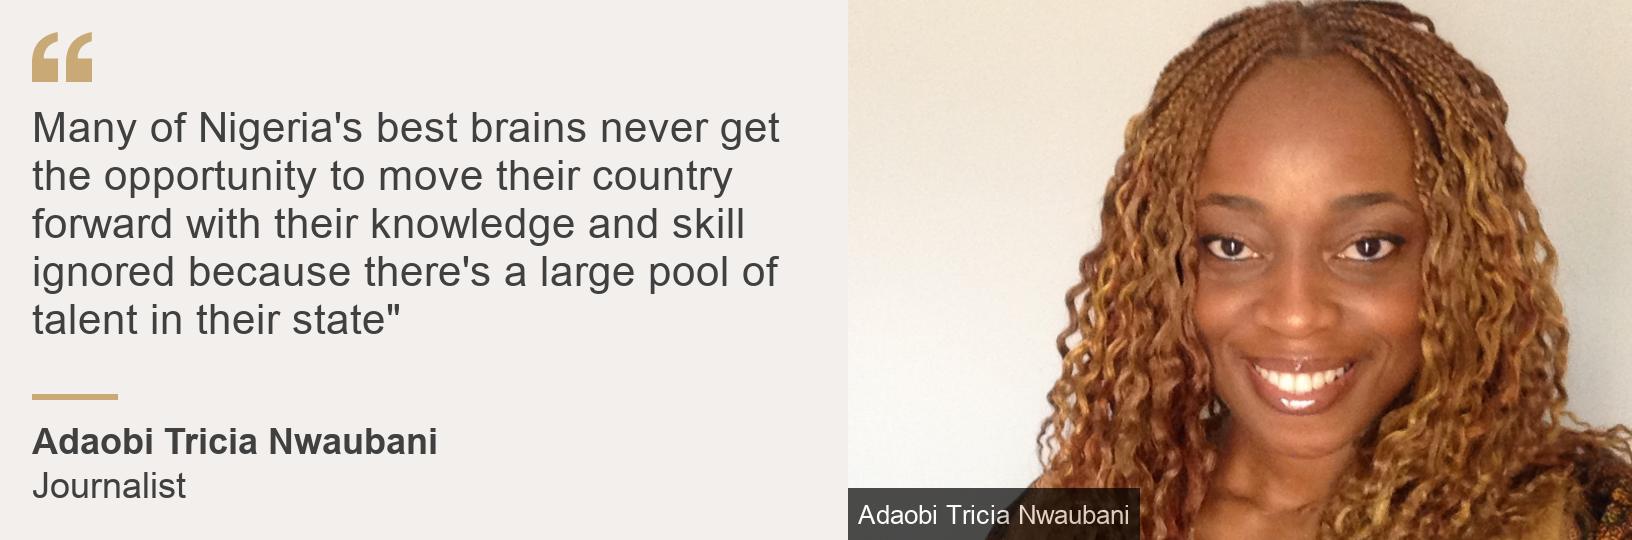 "Many of Nigeria's best brains never get the opportunity to move their country forward with their knowledge and skill ignored because there's a large pool of talent in their state"", Source: Adaobi Tricia Nwaubani, Source description: Journalist, Image: Adaobi Tricia Nwaubani